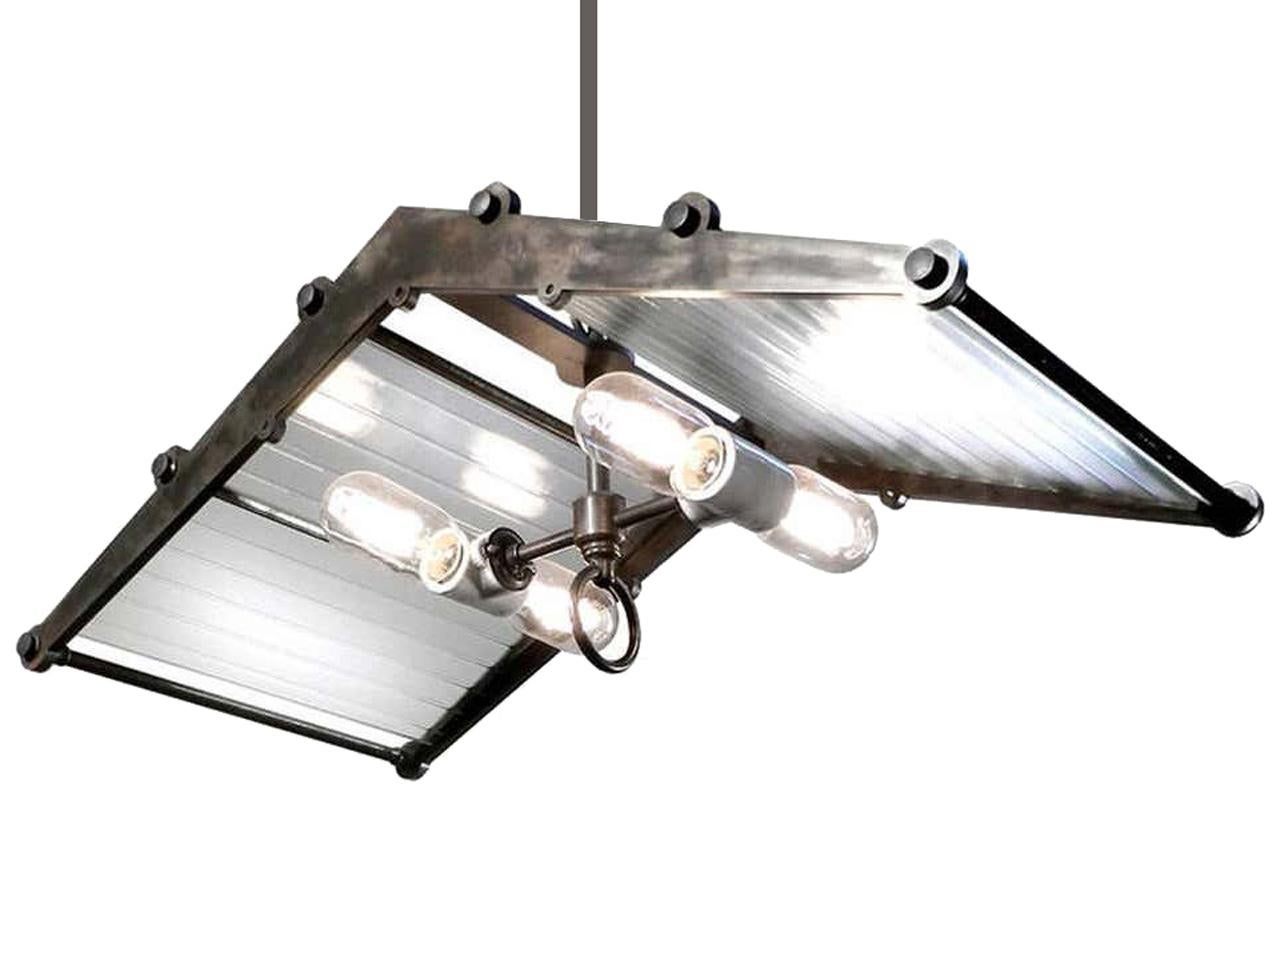 This oversized pendant features a substantial 12 x 24 inch frame designed for the early ribbon glass panels. The glass casts a beautiful 3D glow. The blackened brass and steel frame tents over four floating horizontal tubular bulbs using porcelain